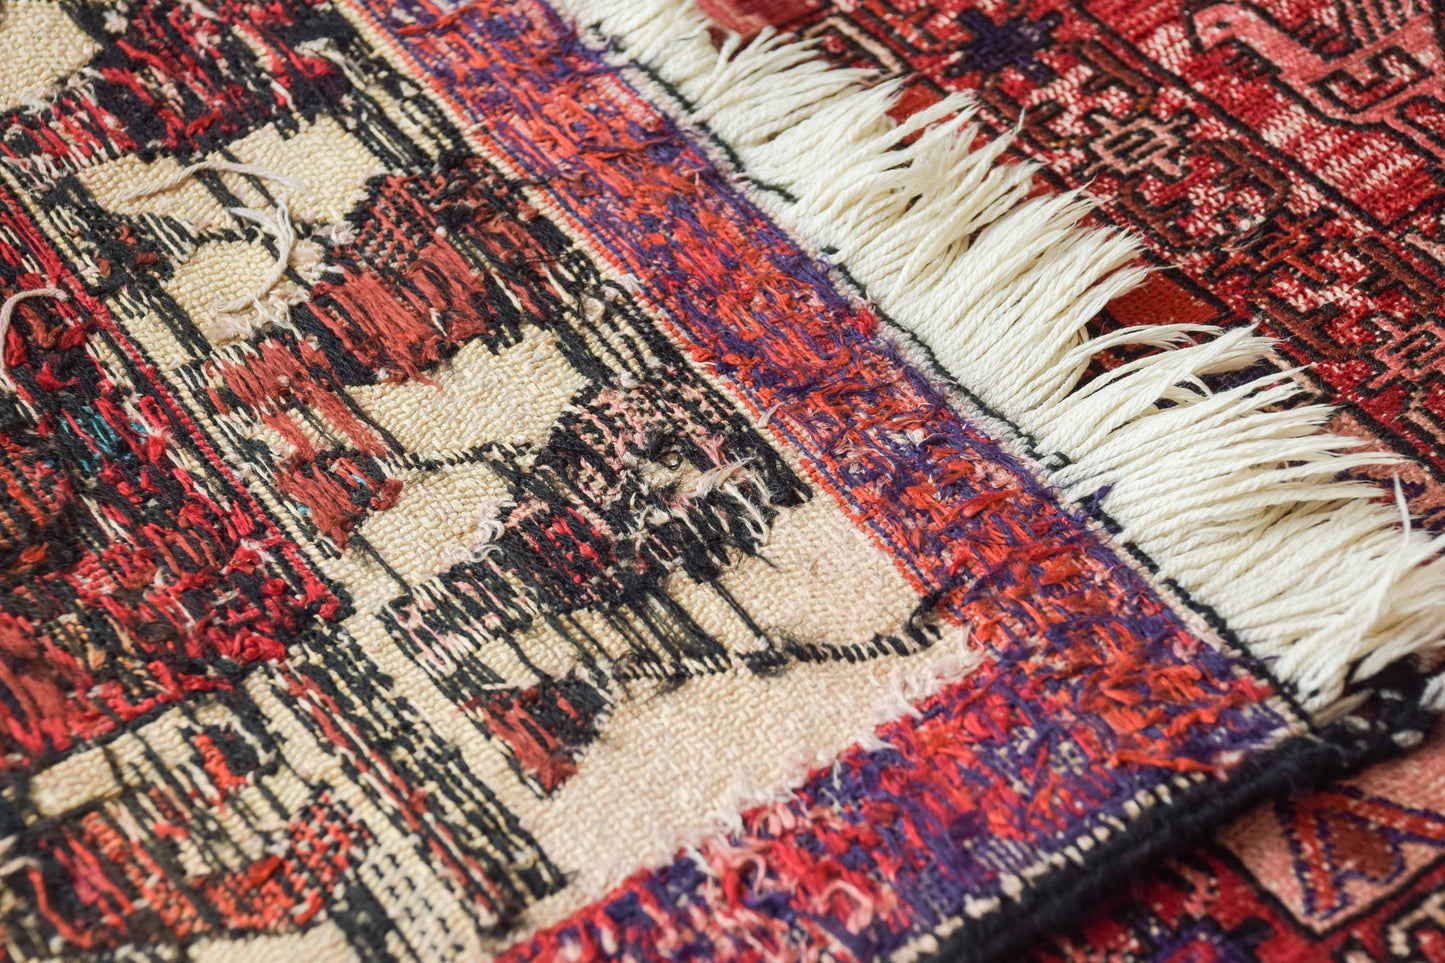 Interesting Handwoven Rug with Abstract Birds